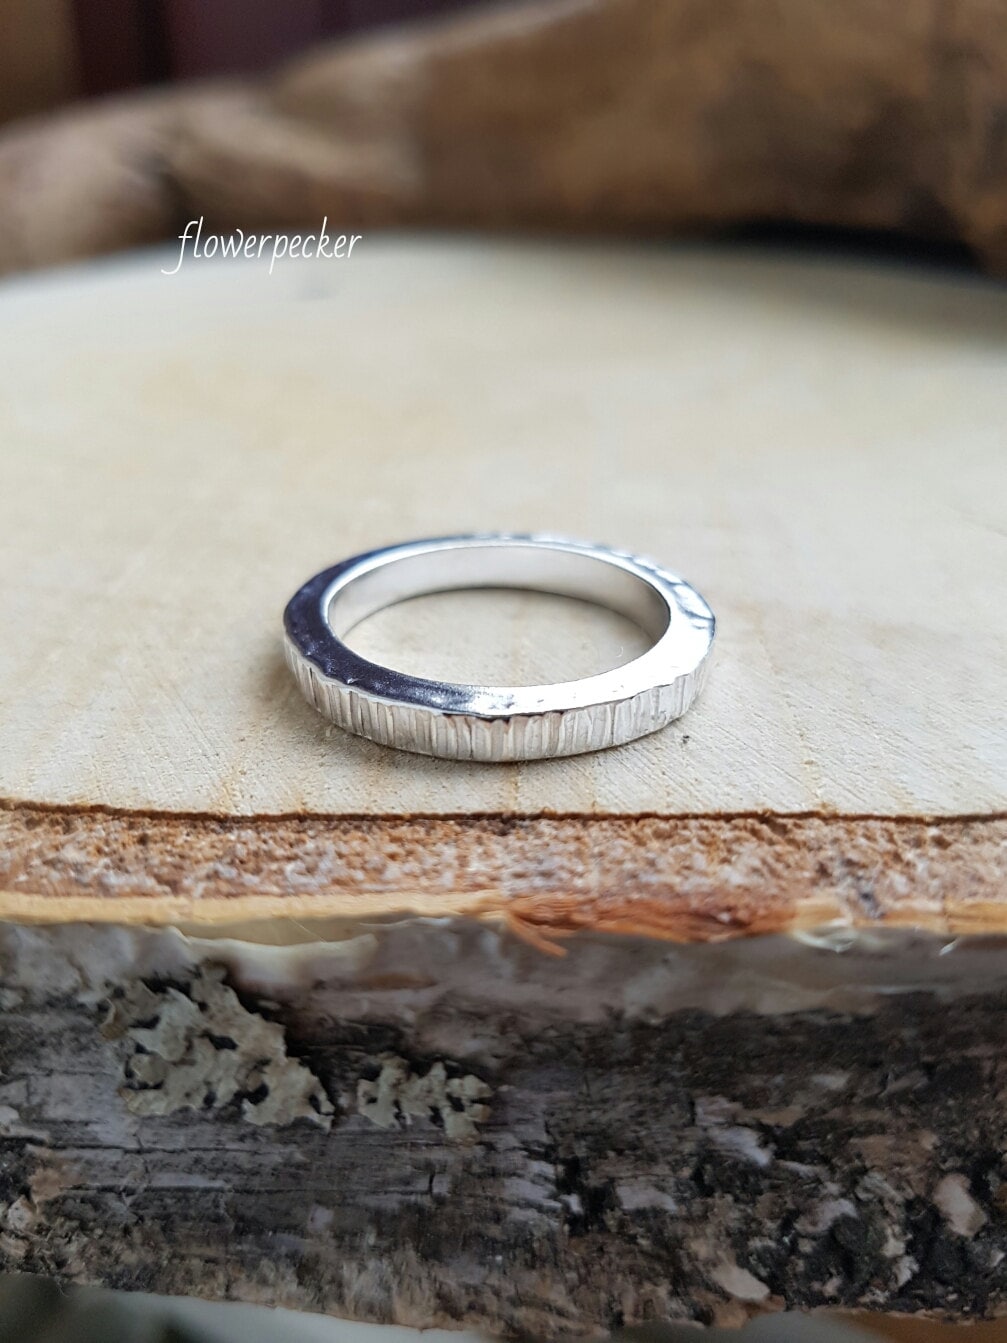 Personalized 925 Sterling Silver Wedding His And Hers Rings With Adjustable  Size For Couples Blank Design For Men And Women From Jane012, $4.58 |  DHgate.Com